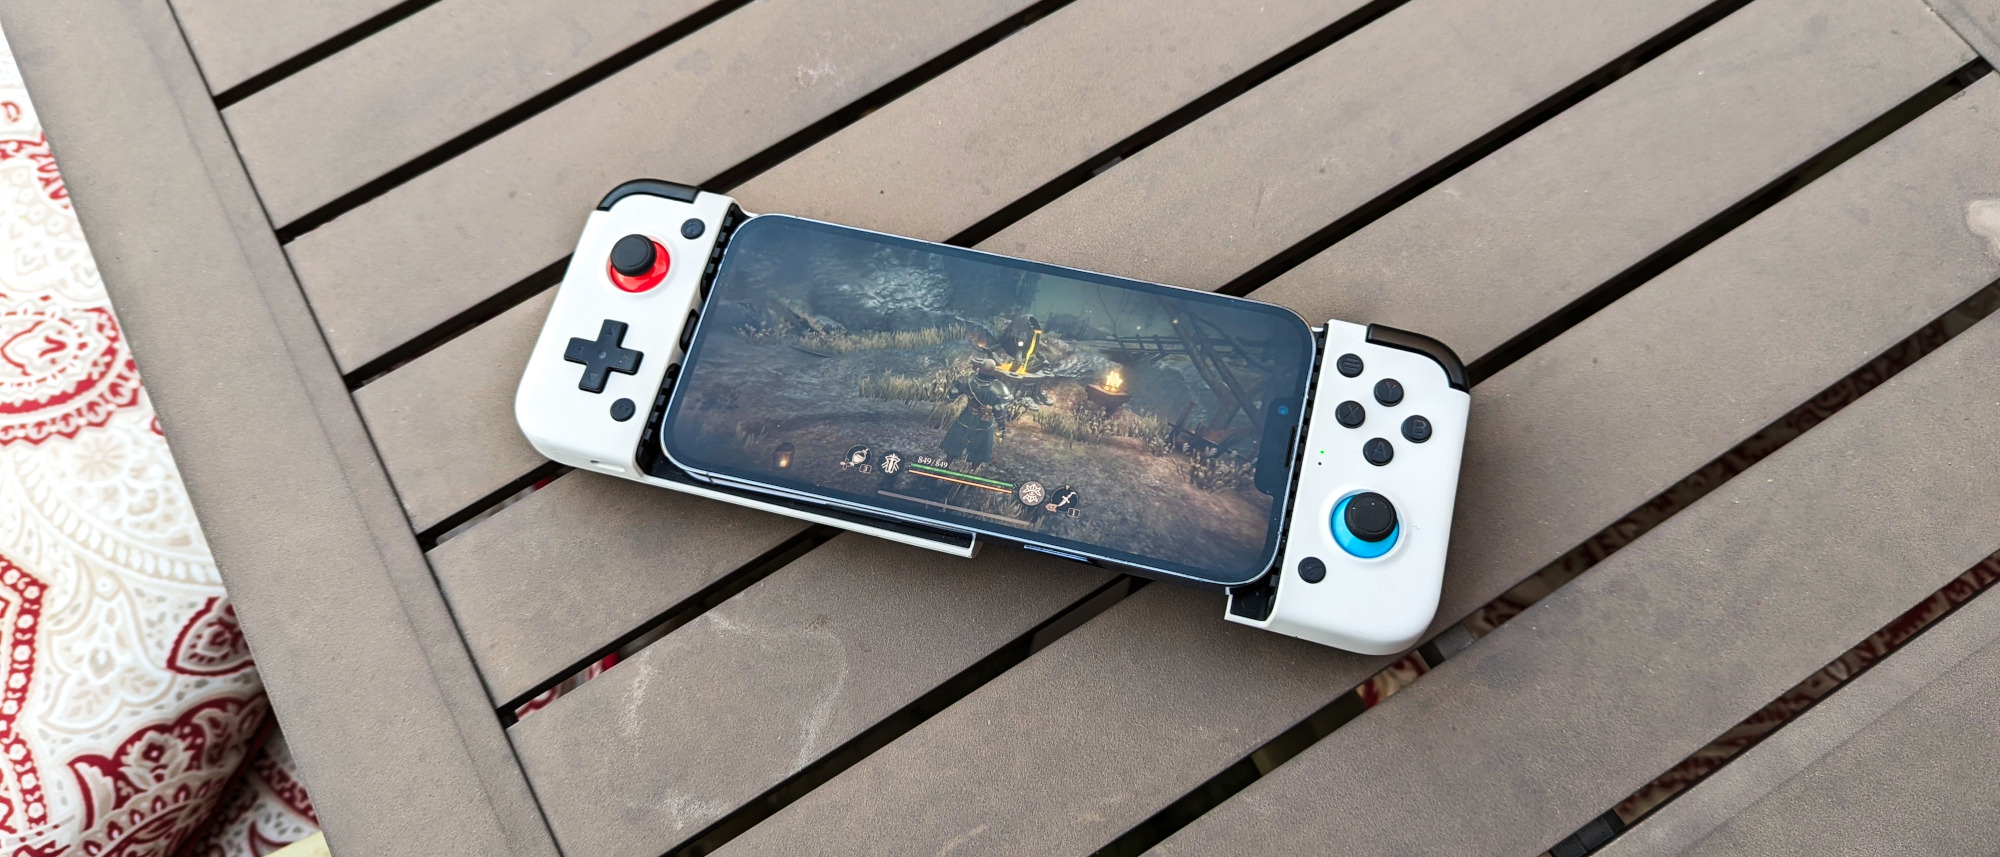 GameSir X2 controller review: Level up your gaming with this